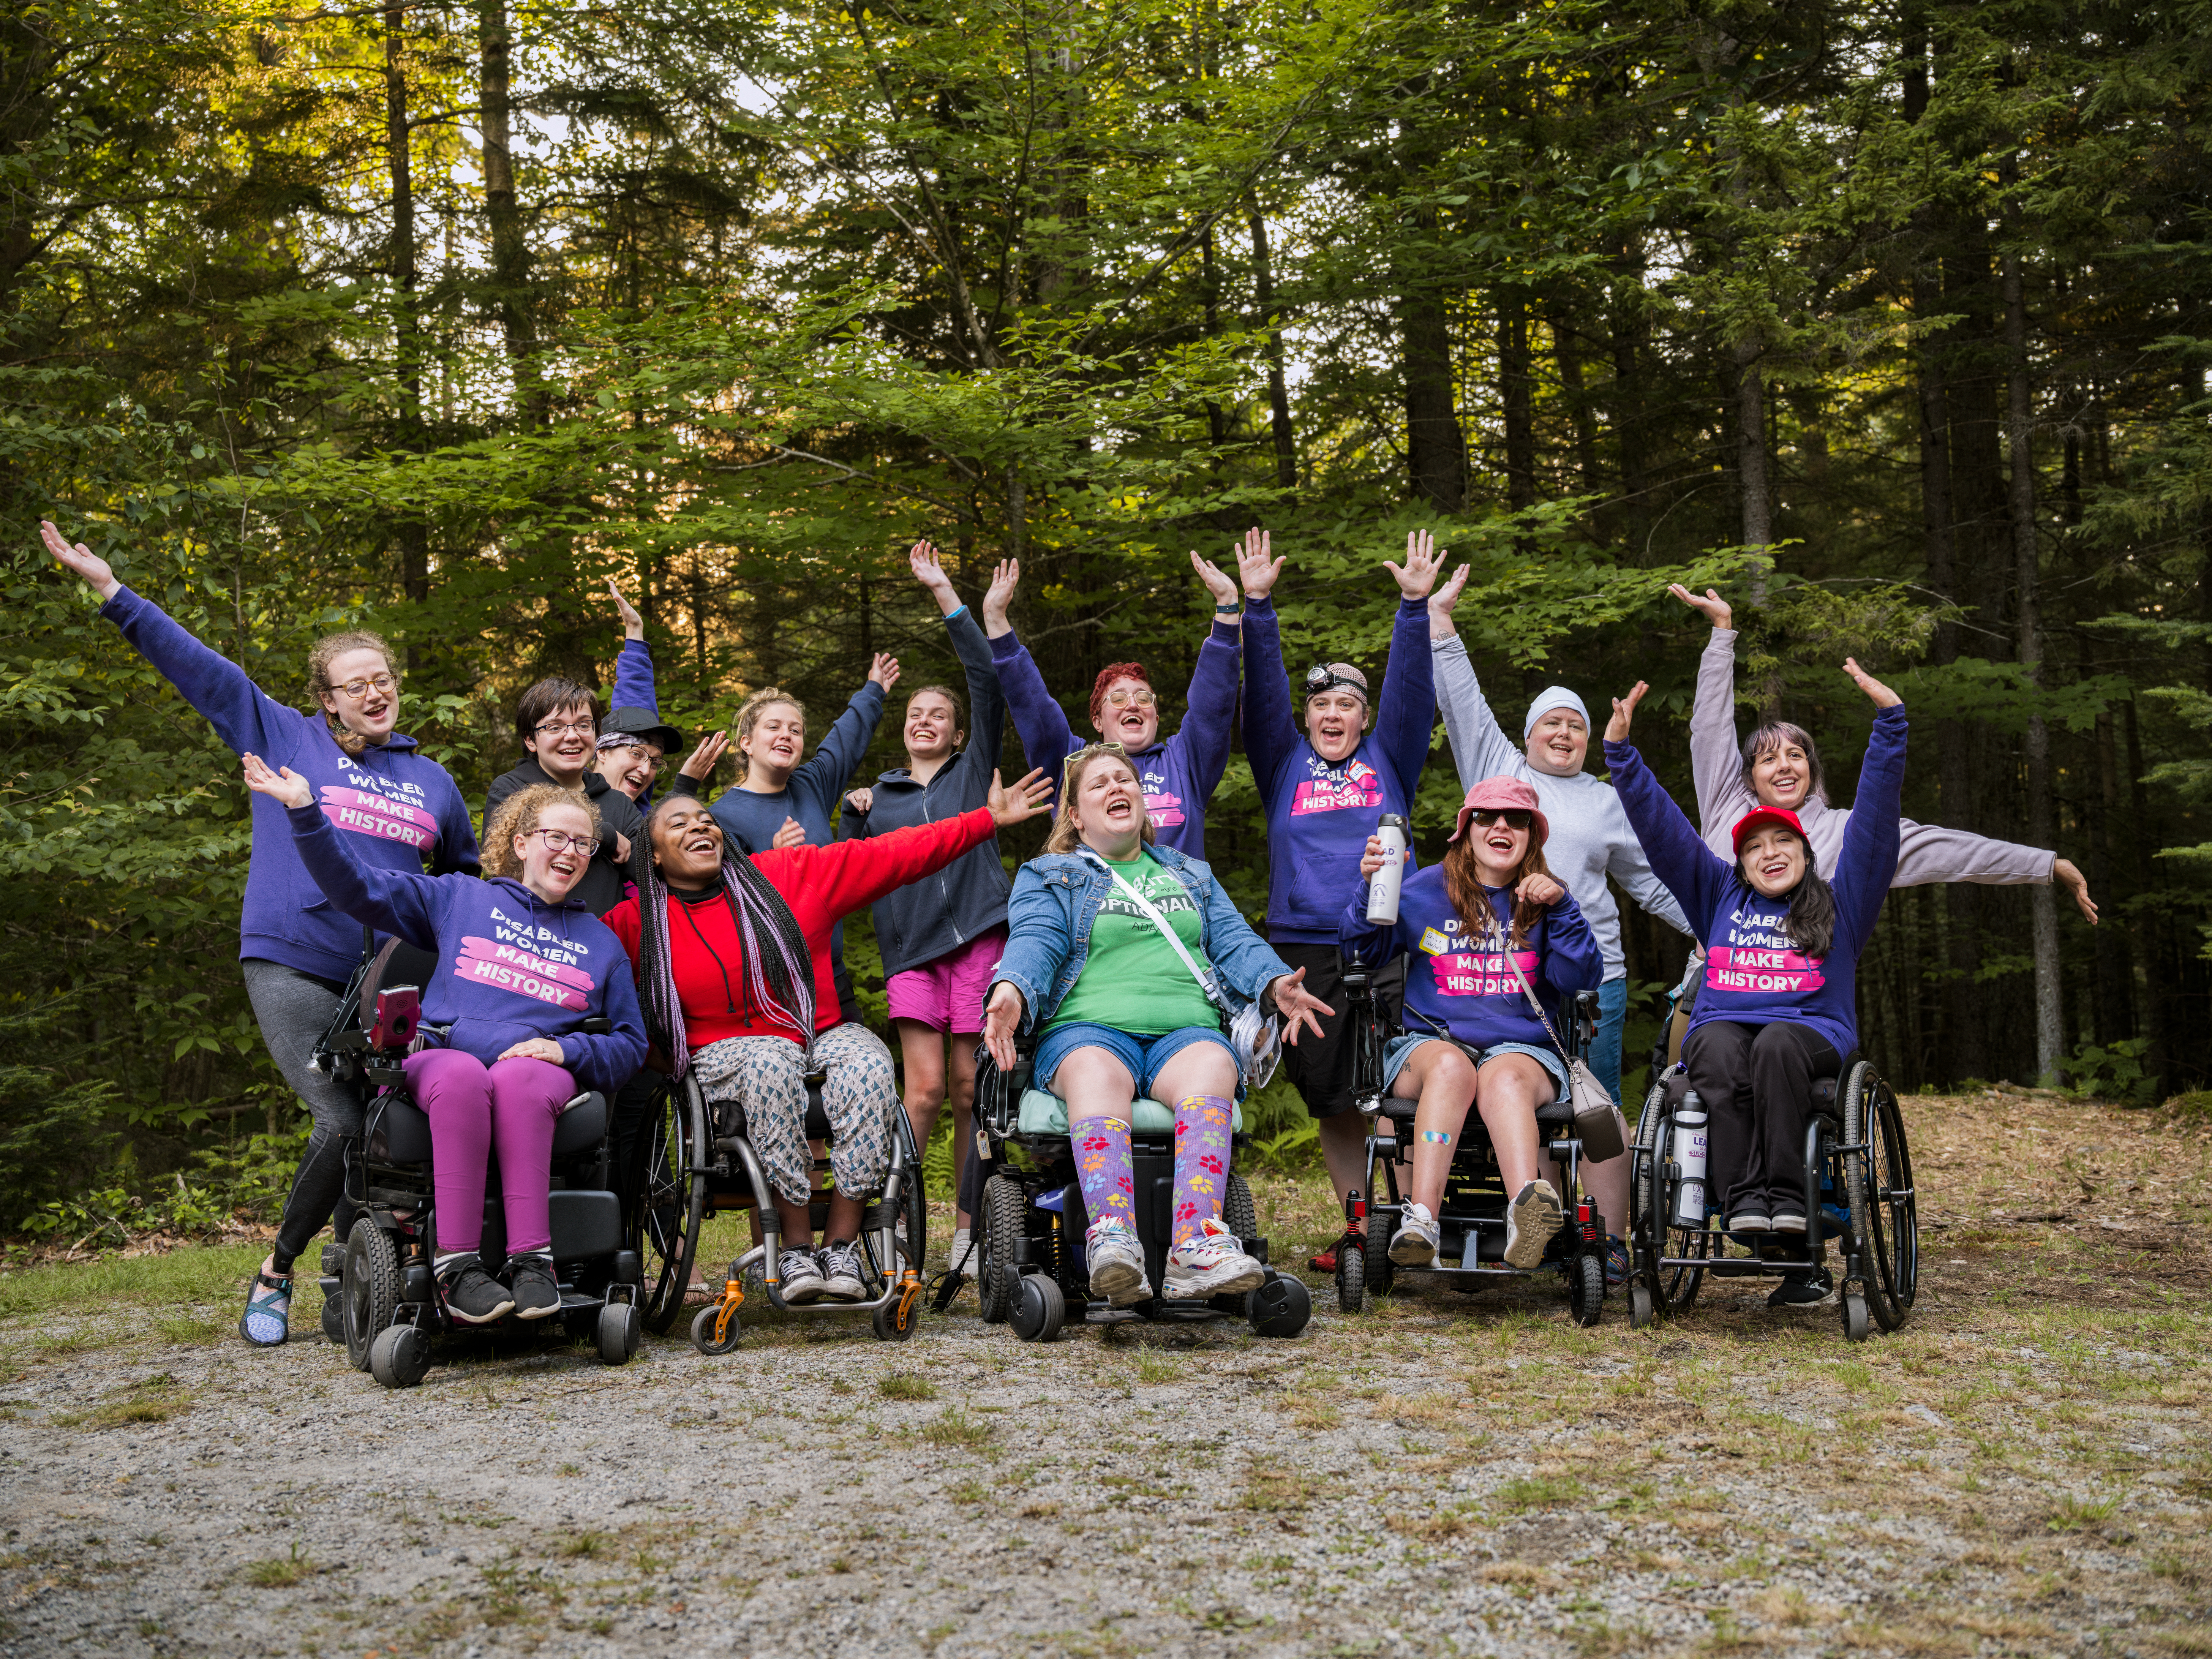 Able-bodied and Women in wheelchairs outdoors